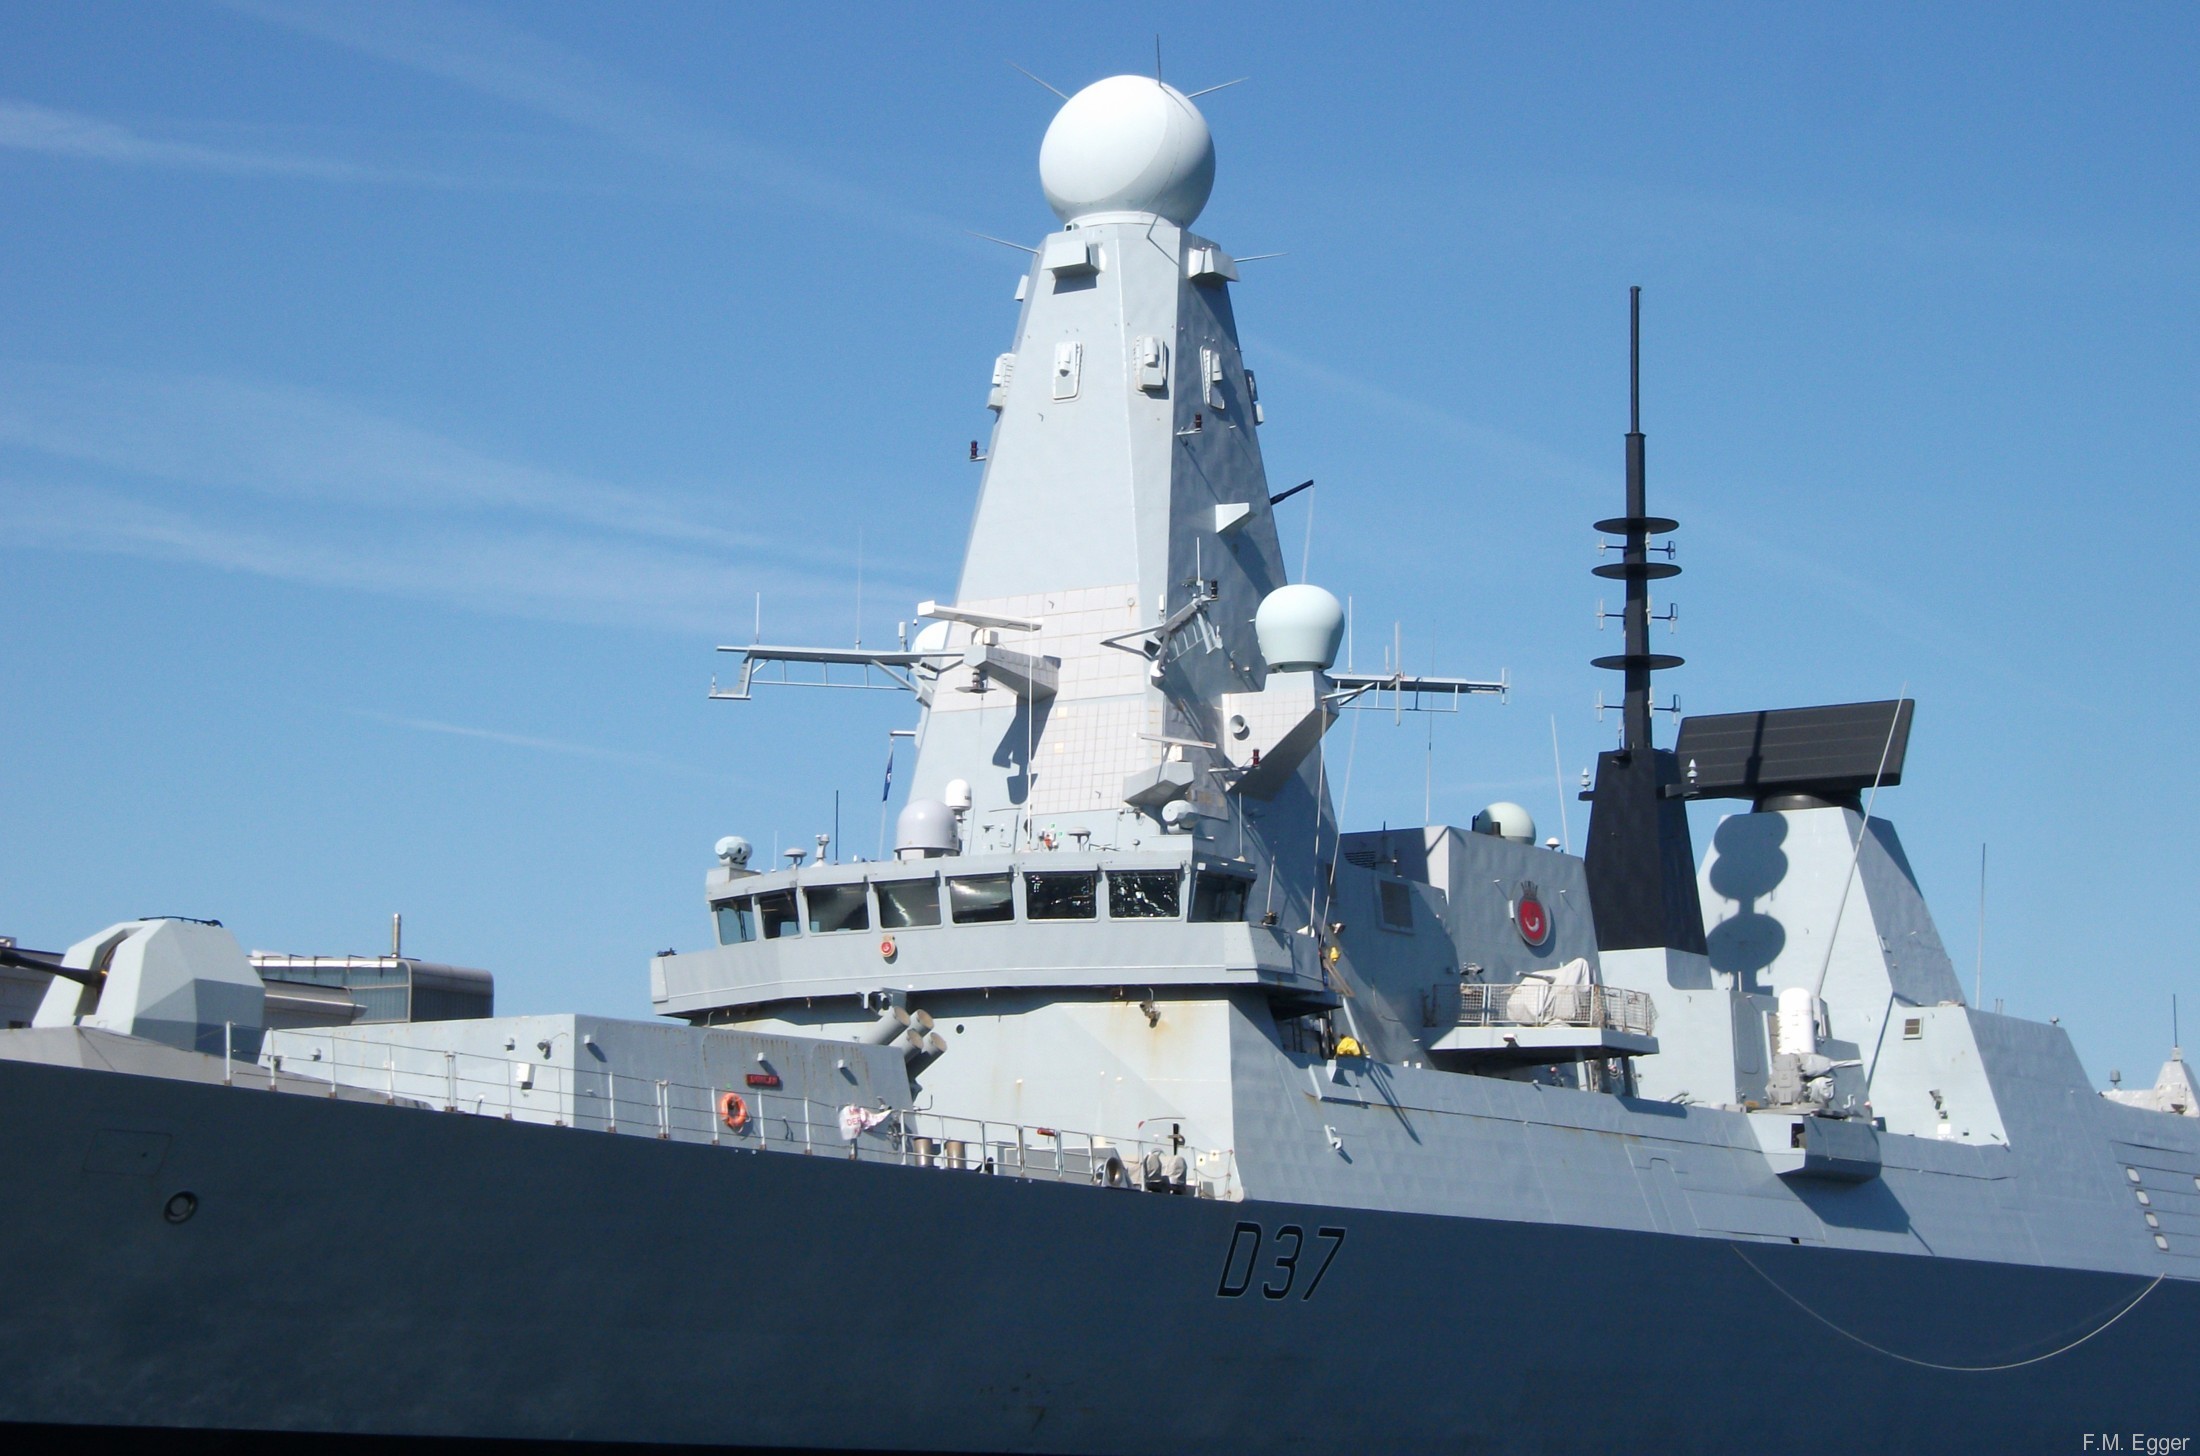 hms duncan d-37 type 45 daring class guided missile destroyer royal navy nato snmg-2 trieste 05